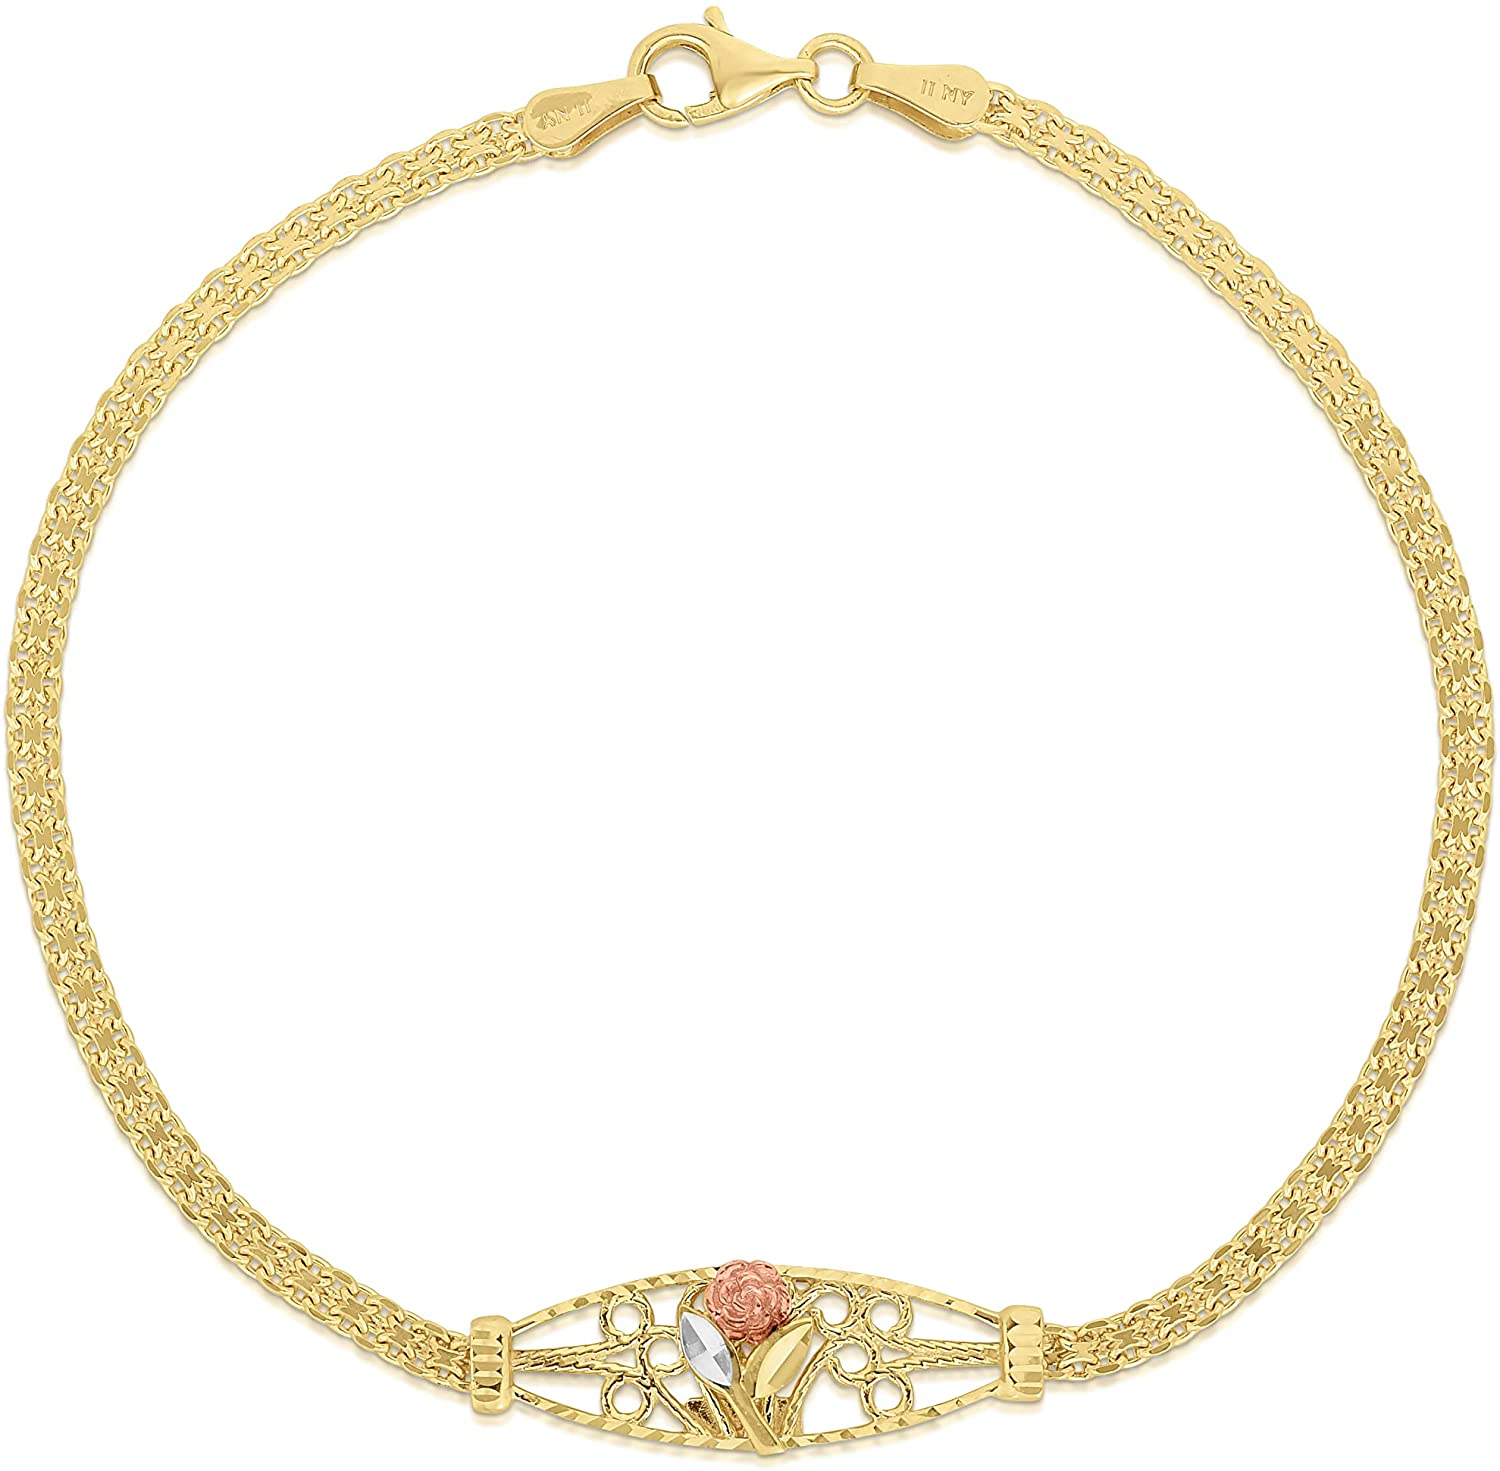 10k Yellow Gold Bismark Links with Rose Gold Rose and Two-Tone Gold Leaf Filigree Charm Bracelet